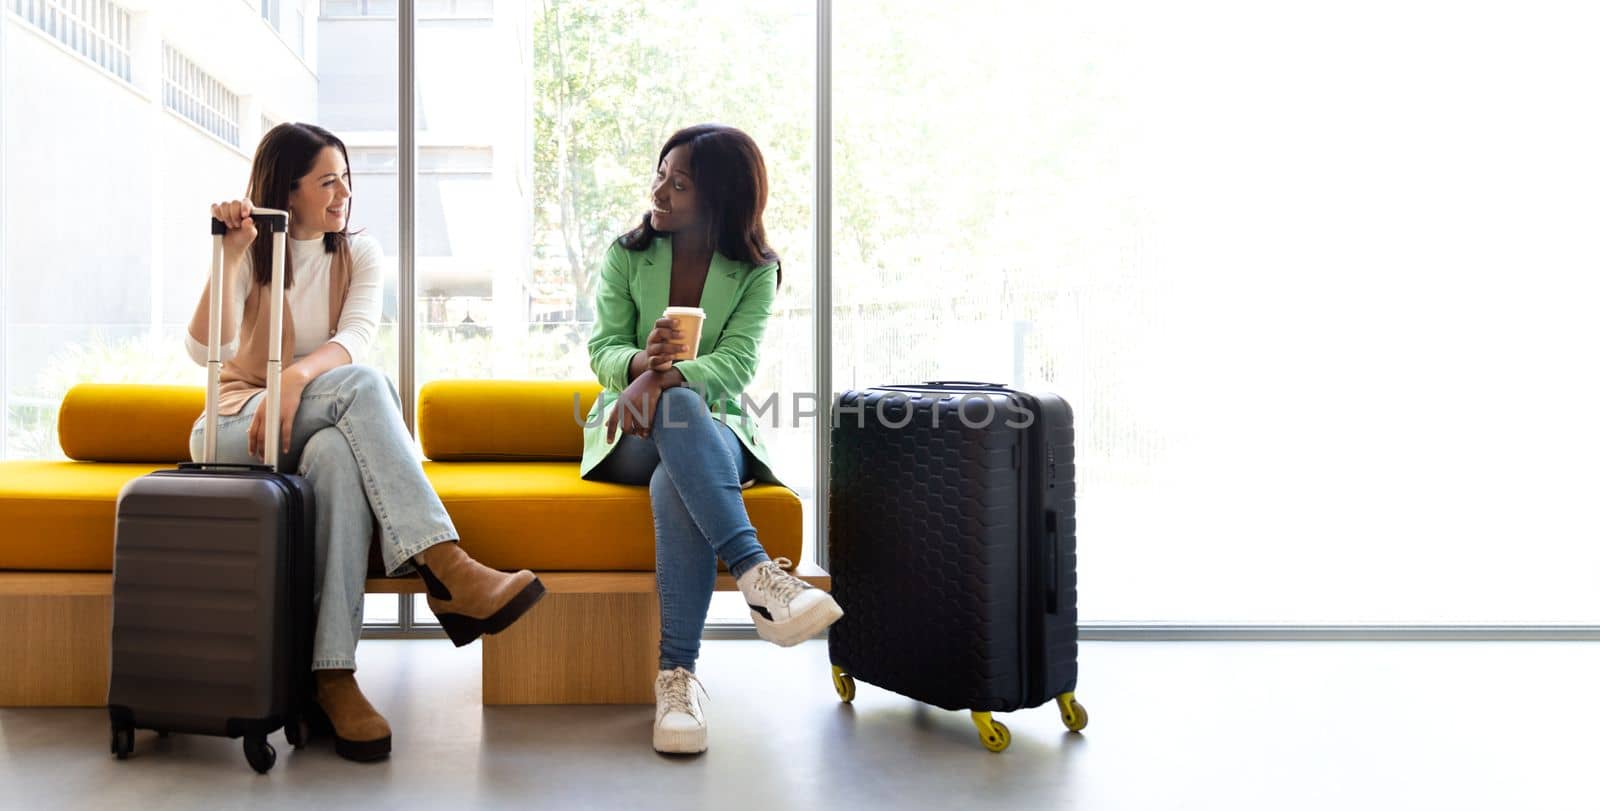 Horizontal banner image of multiracial women sitting on hotel reception bench talking. Copy space. Lifestyle and travel concept.